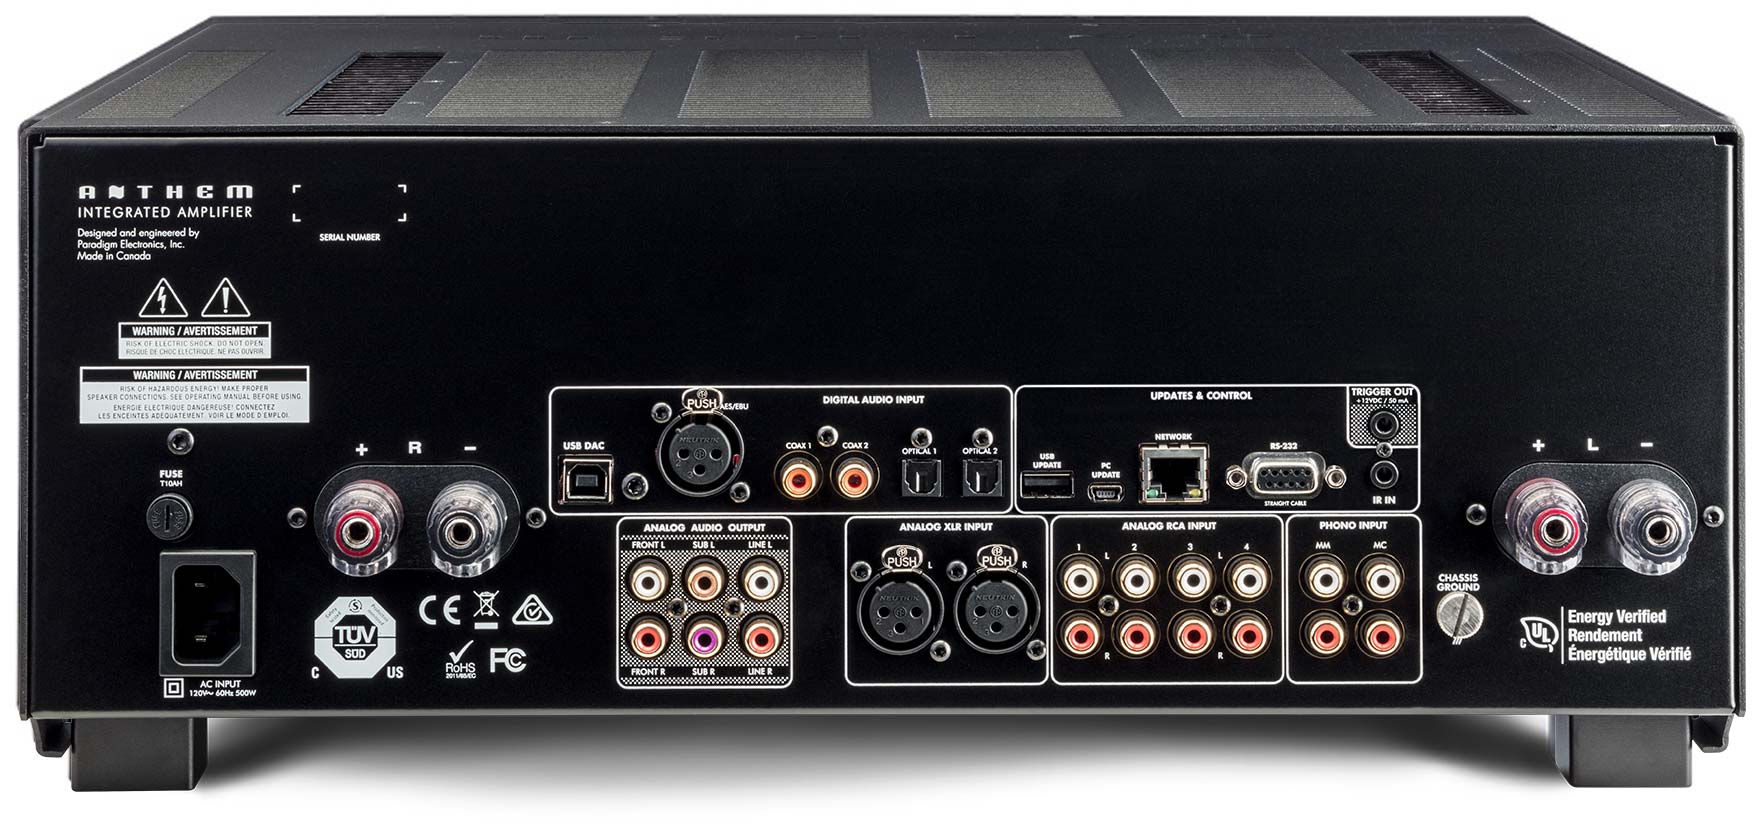 Specialist vækst Begrænset Stereo amplifiers / preamplifiers with proper support for subwoofers –  Sigberg Audio